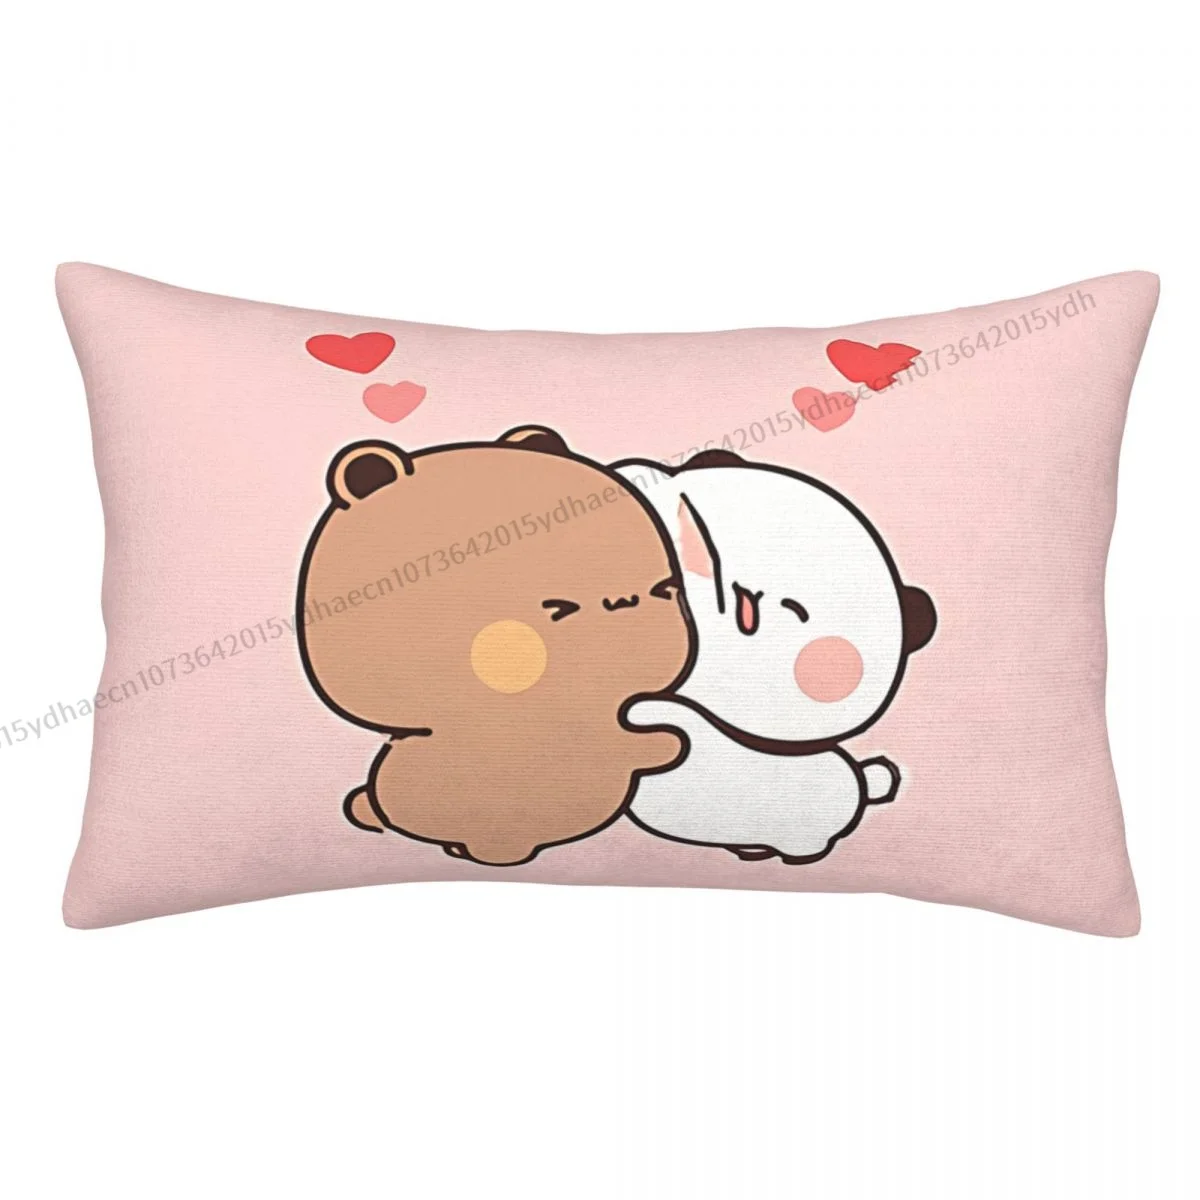 

Kiss Printed Pillow Case Panda And Brownie Mochi Bear Backpack Coussin Covers Breathable Home Decor Pillowcase